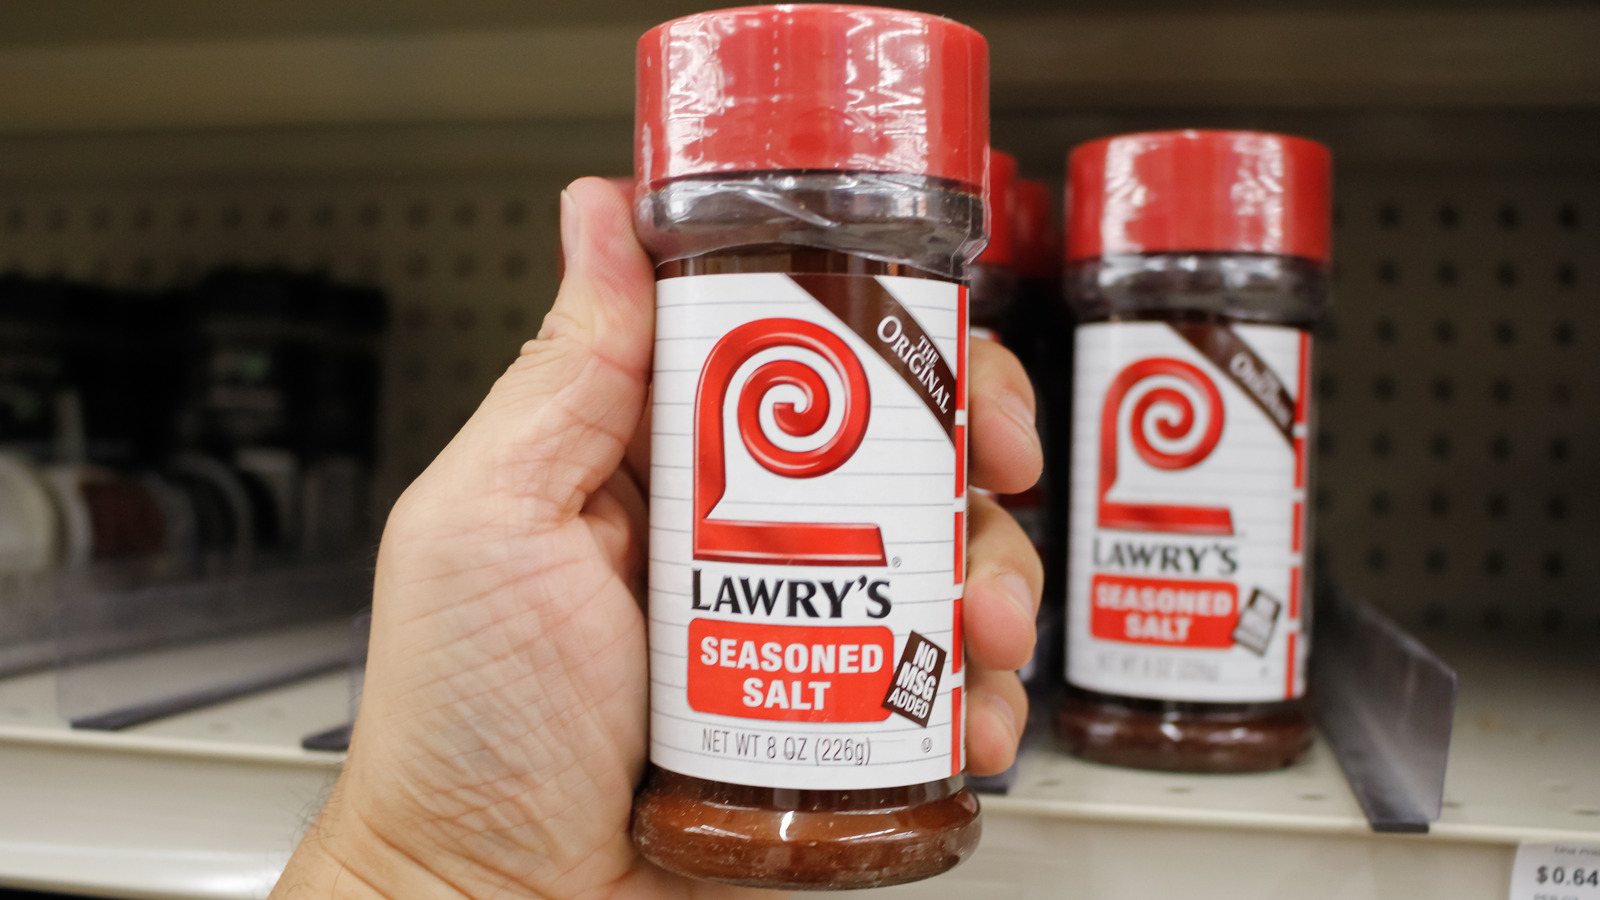 https://www.tastingtable.com/img/gallery/lawrys-is-known-for-its-iconic-seasoning-and-this-special-cut-of-beef/l-intro-1661540903.jpg